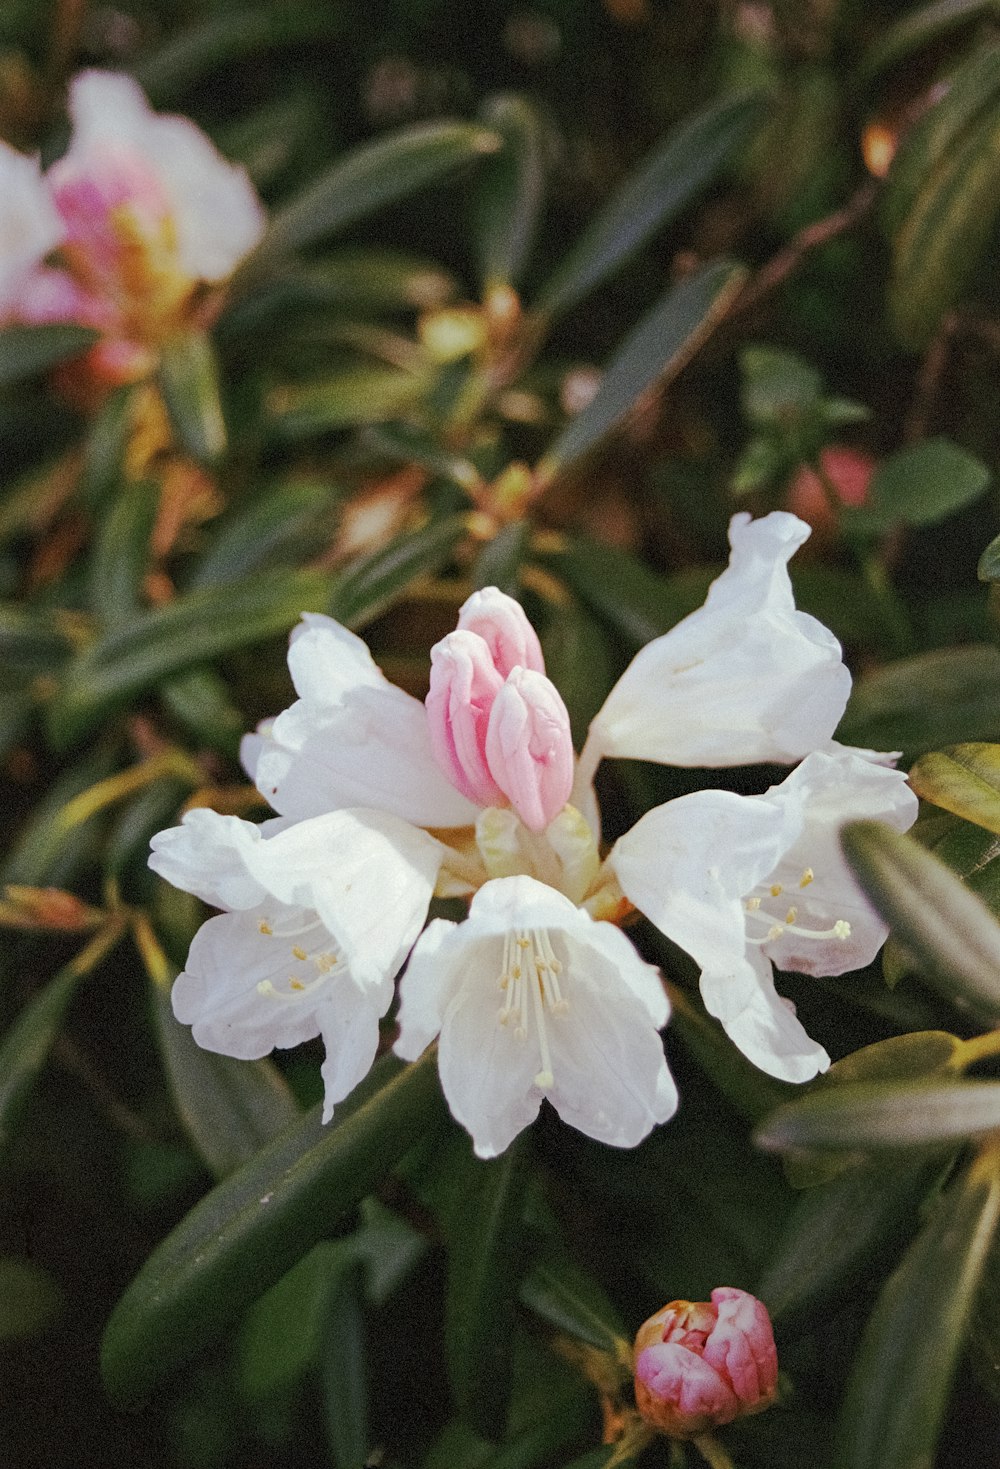 a close up of a white flower with pink stamen